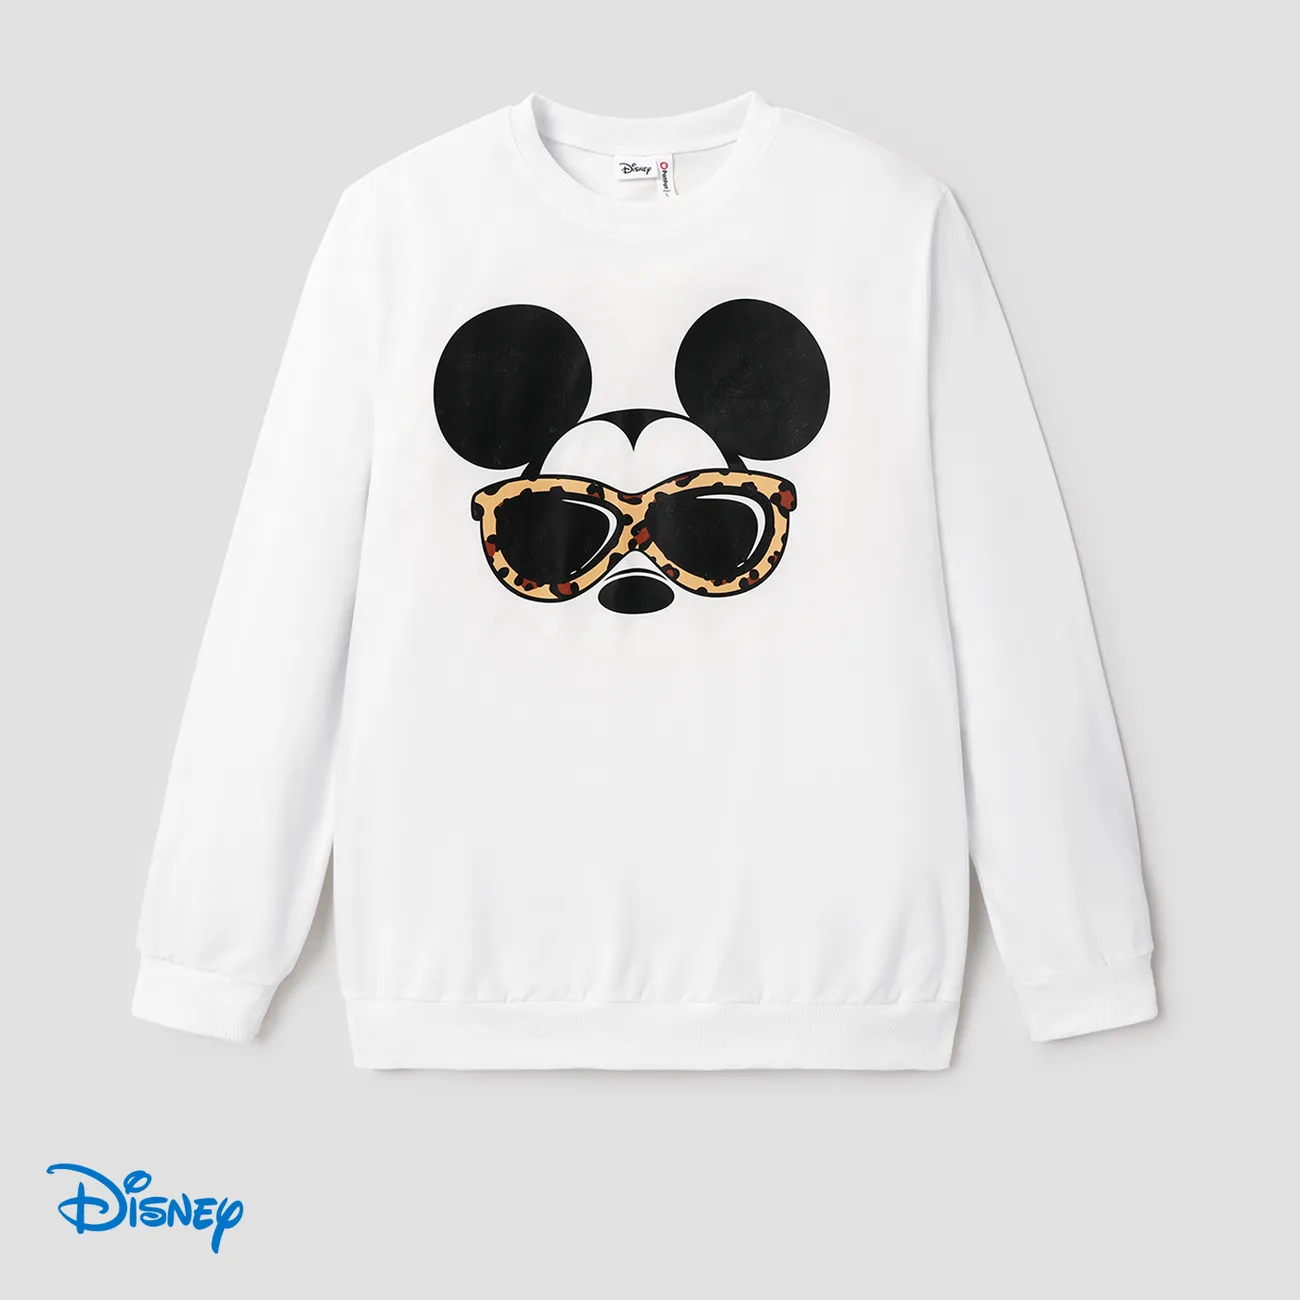 Disney Mickey and Friends Family Matching Character Print Long-sleeve White Top White big image 1